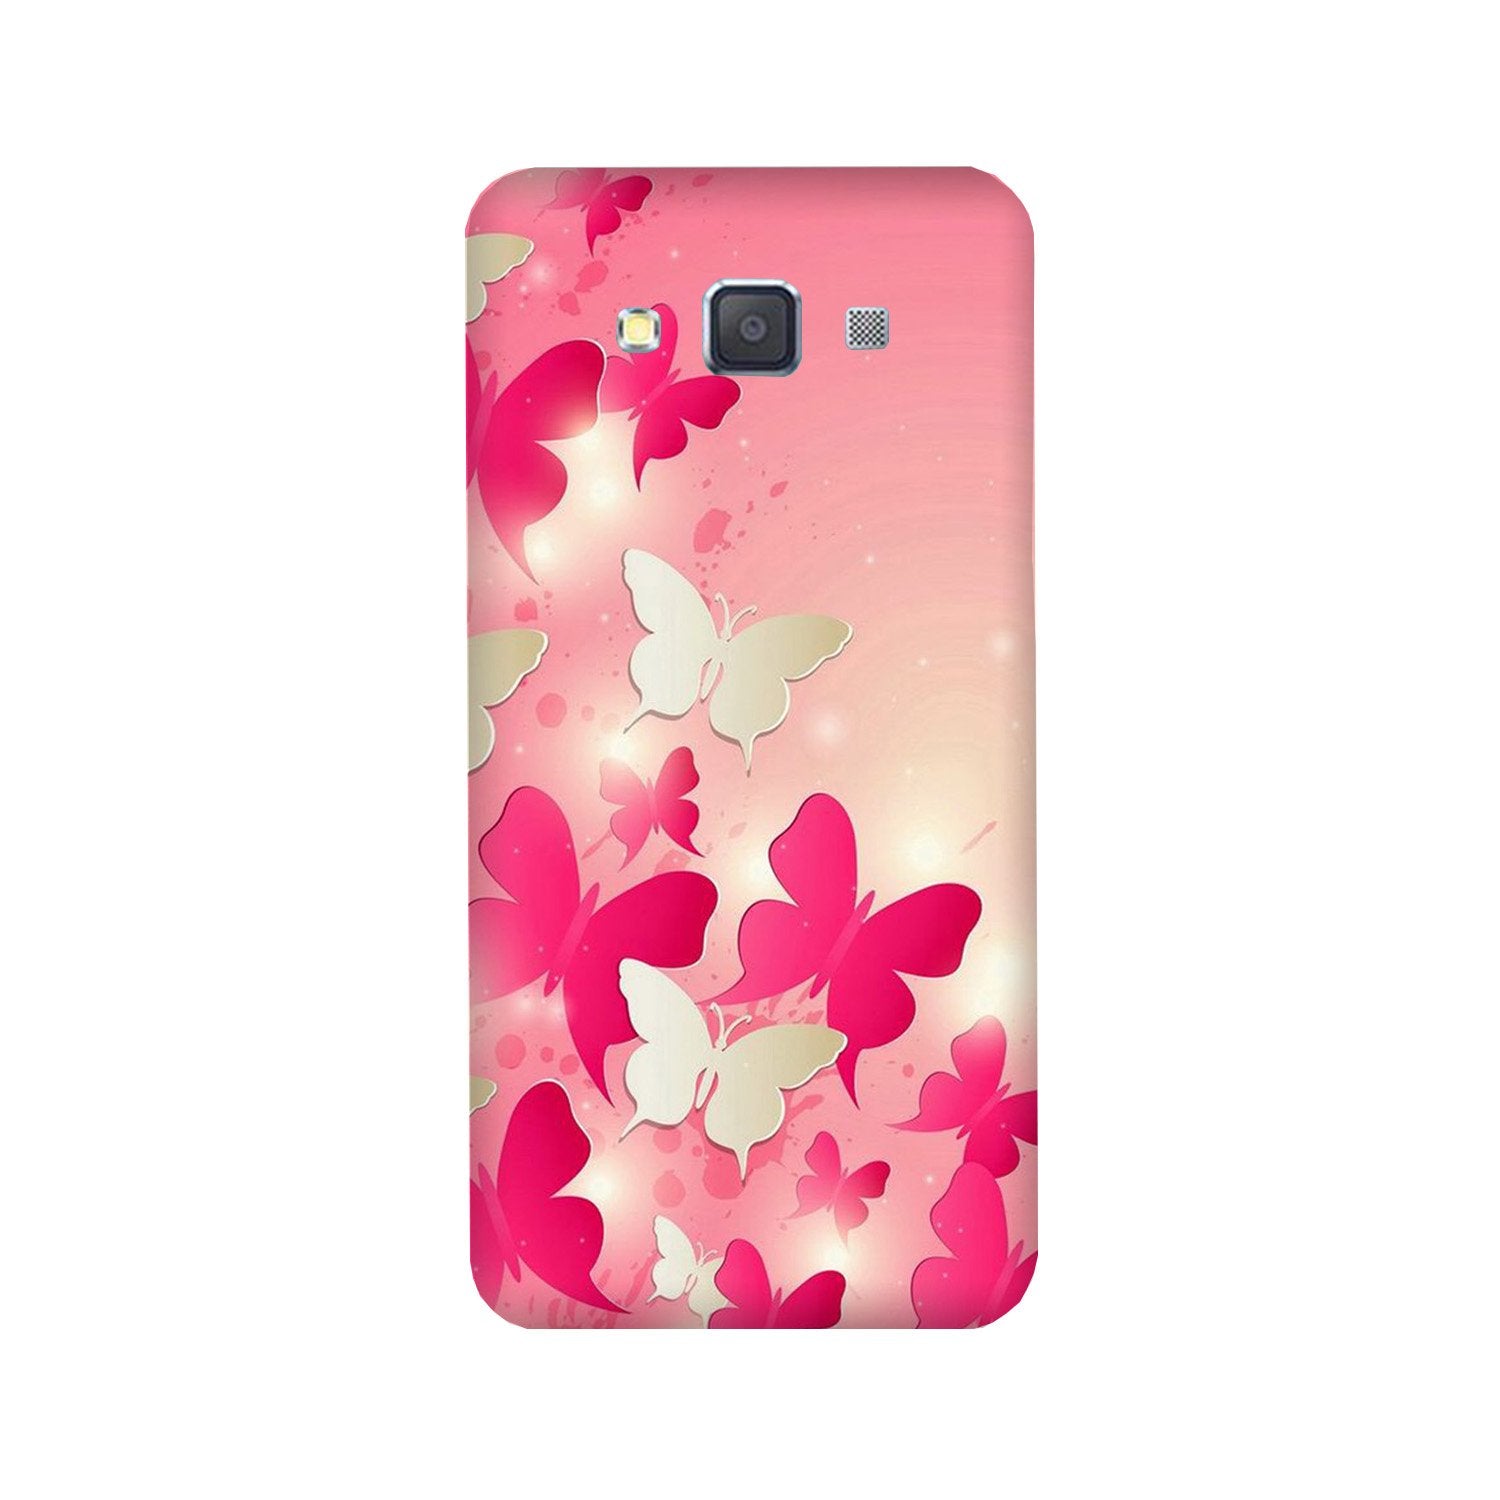 White Pick Butterflies Case for Galaxy Grand Prime